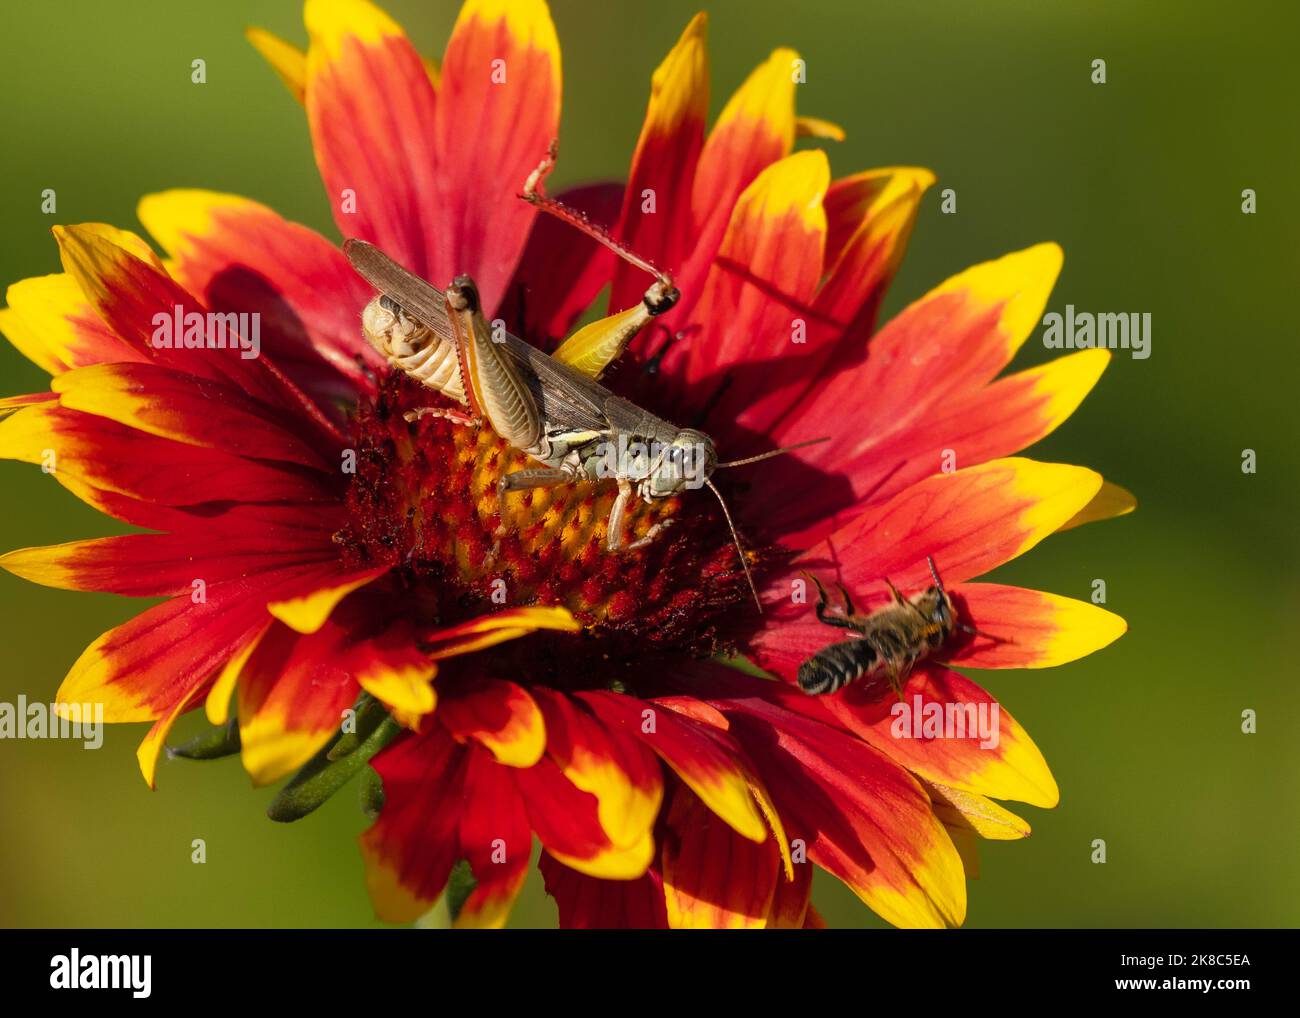 A bee gets kicked off a Gaillardia (Blanked Flower) blossom by a Red-legged Grasshopper's swift leg kick. Stock Photo